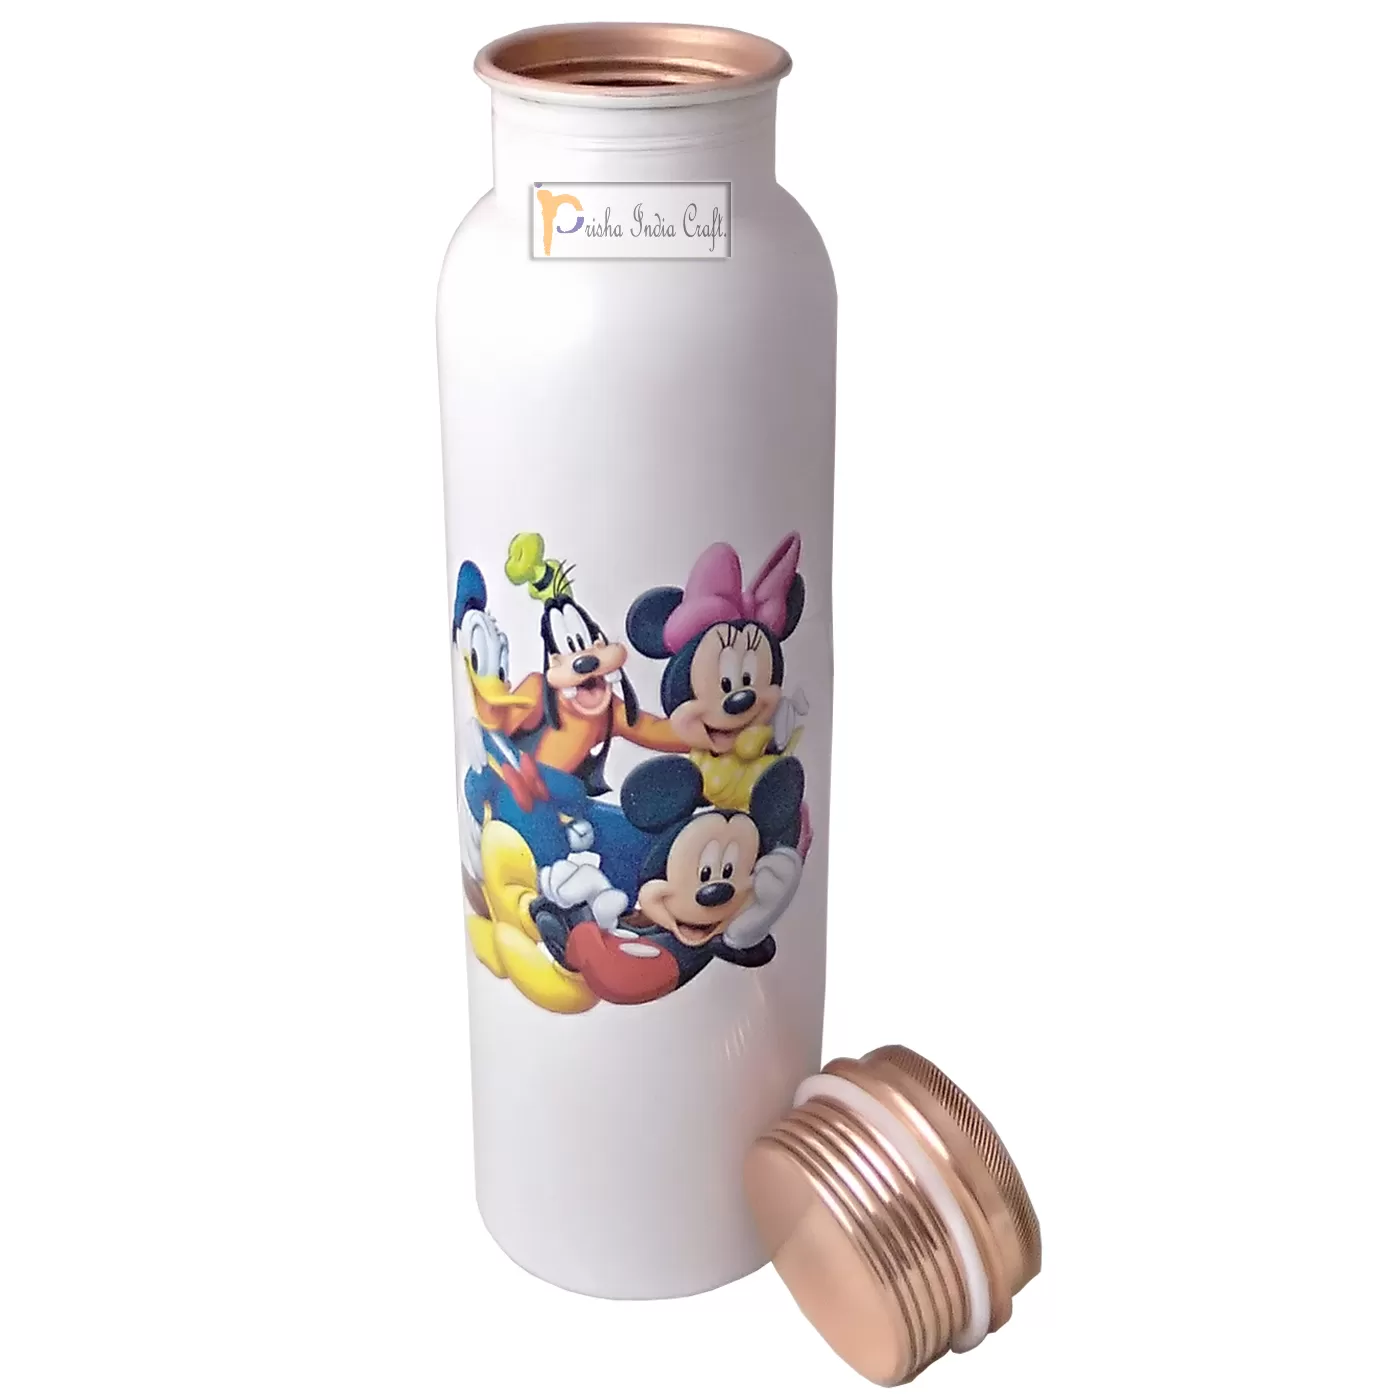 Digital Printed Pure Copper Water Bottle Kids School Water Bottle Mickey Mouse and Donald Design, 1000 ML